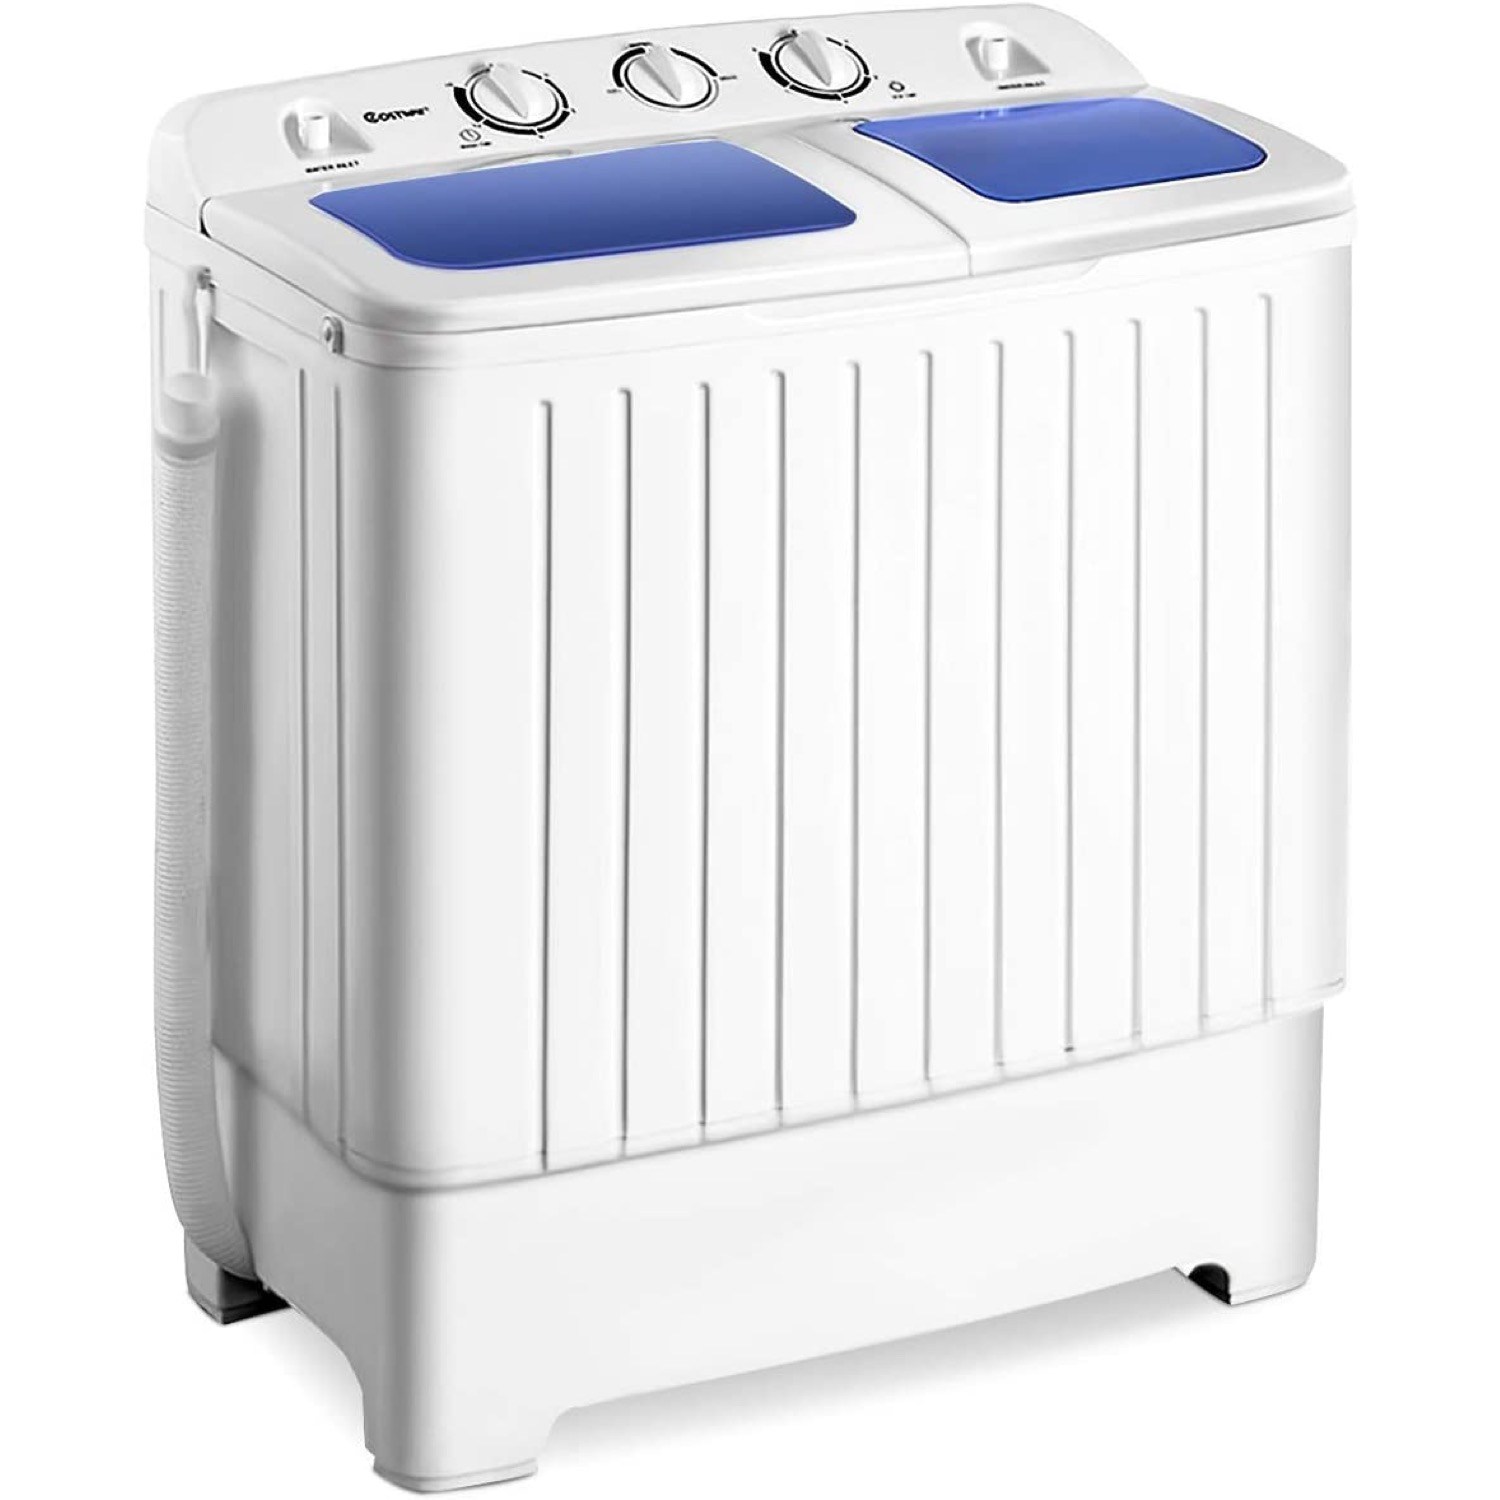 Panda 3200 rpm Portable Spin Dryer Review - Best Portable Spin Dryer? 